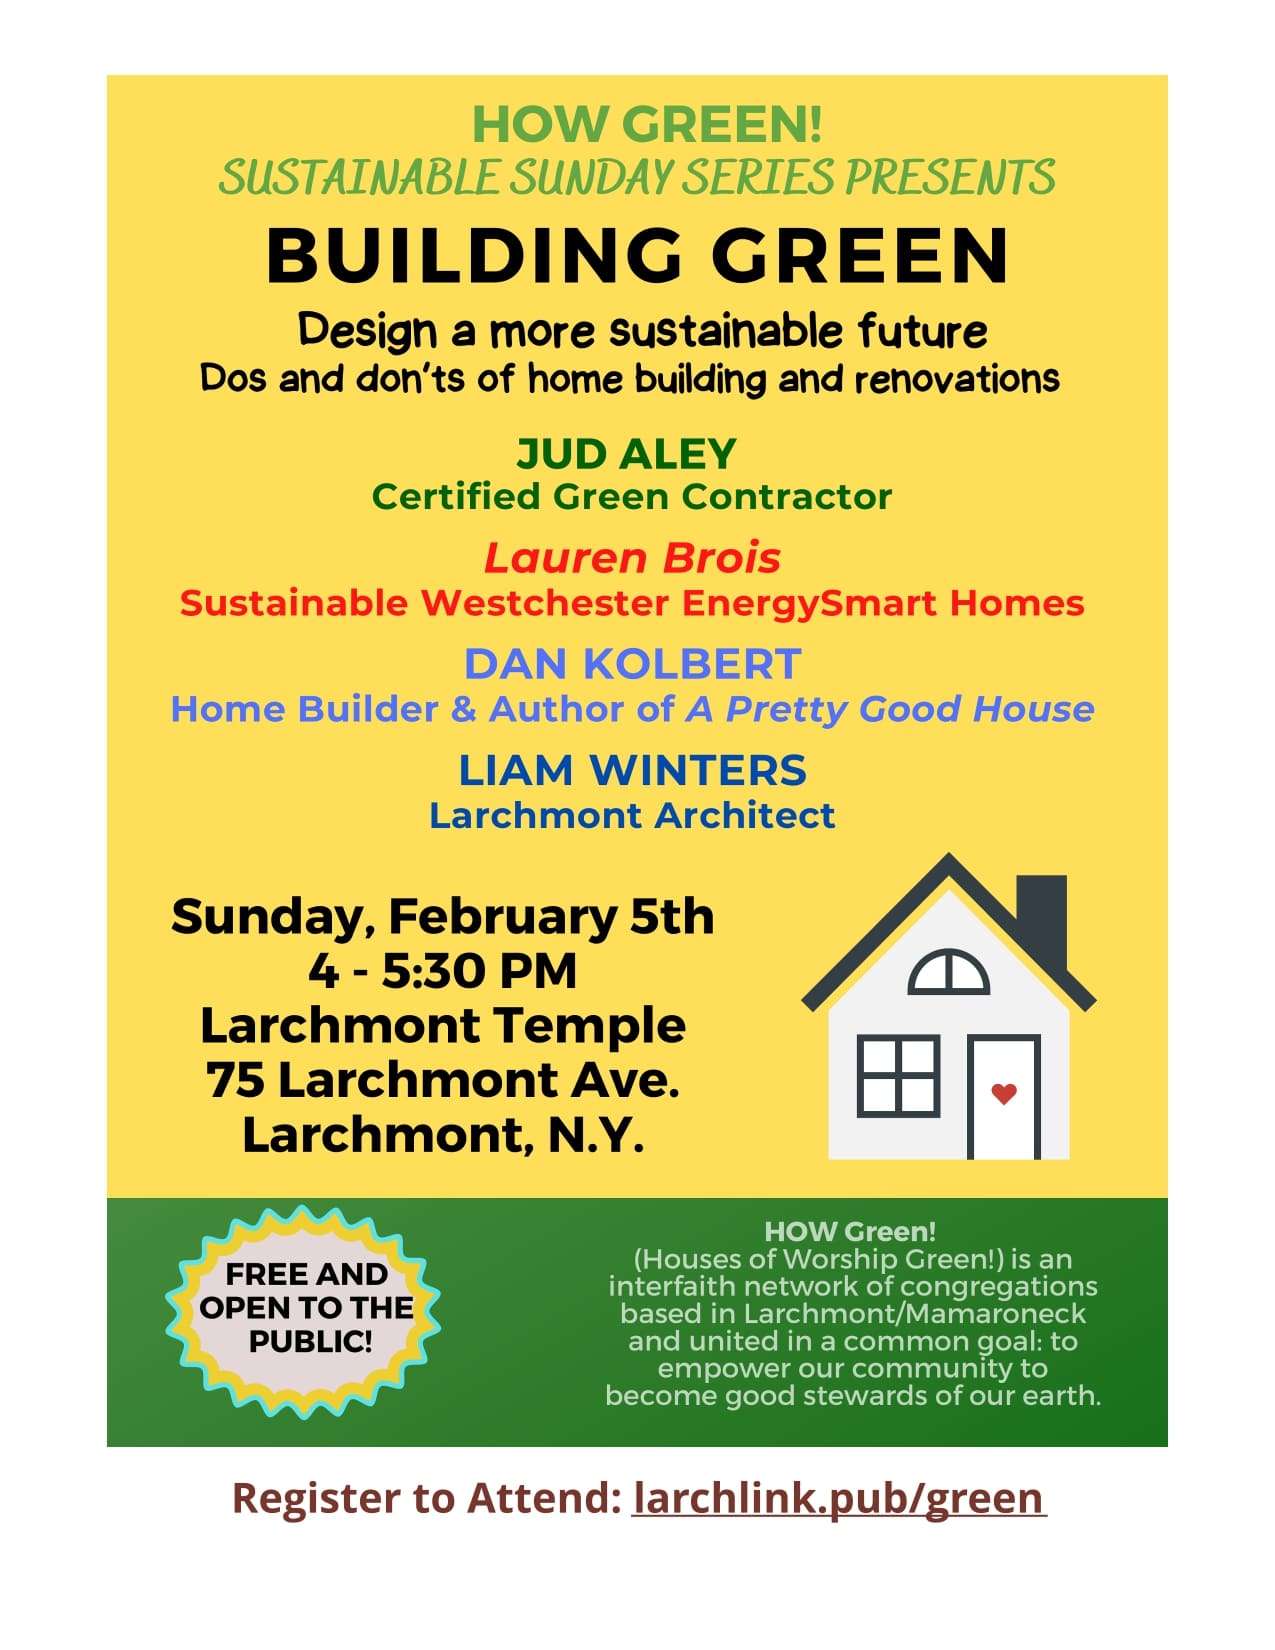 HOW GREEN! Panel Discussion on Building and Renovating Green Homes